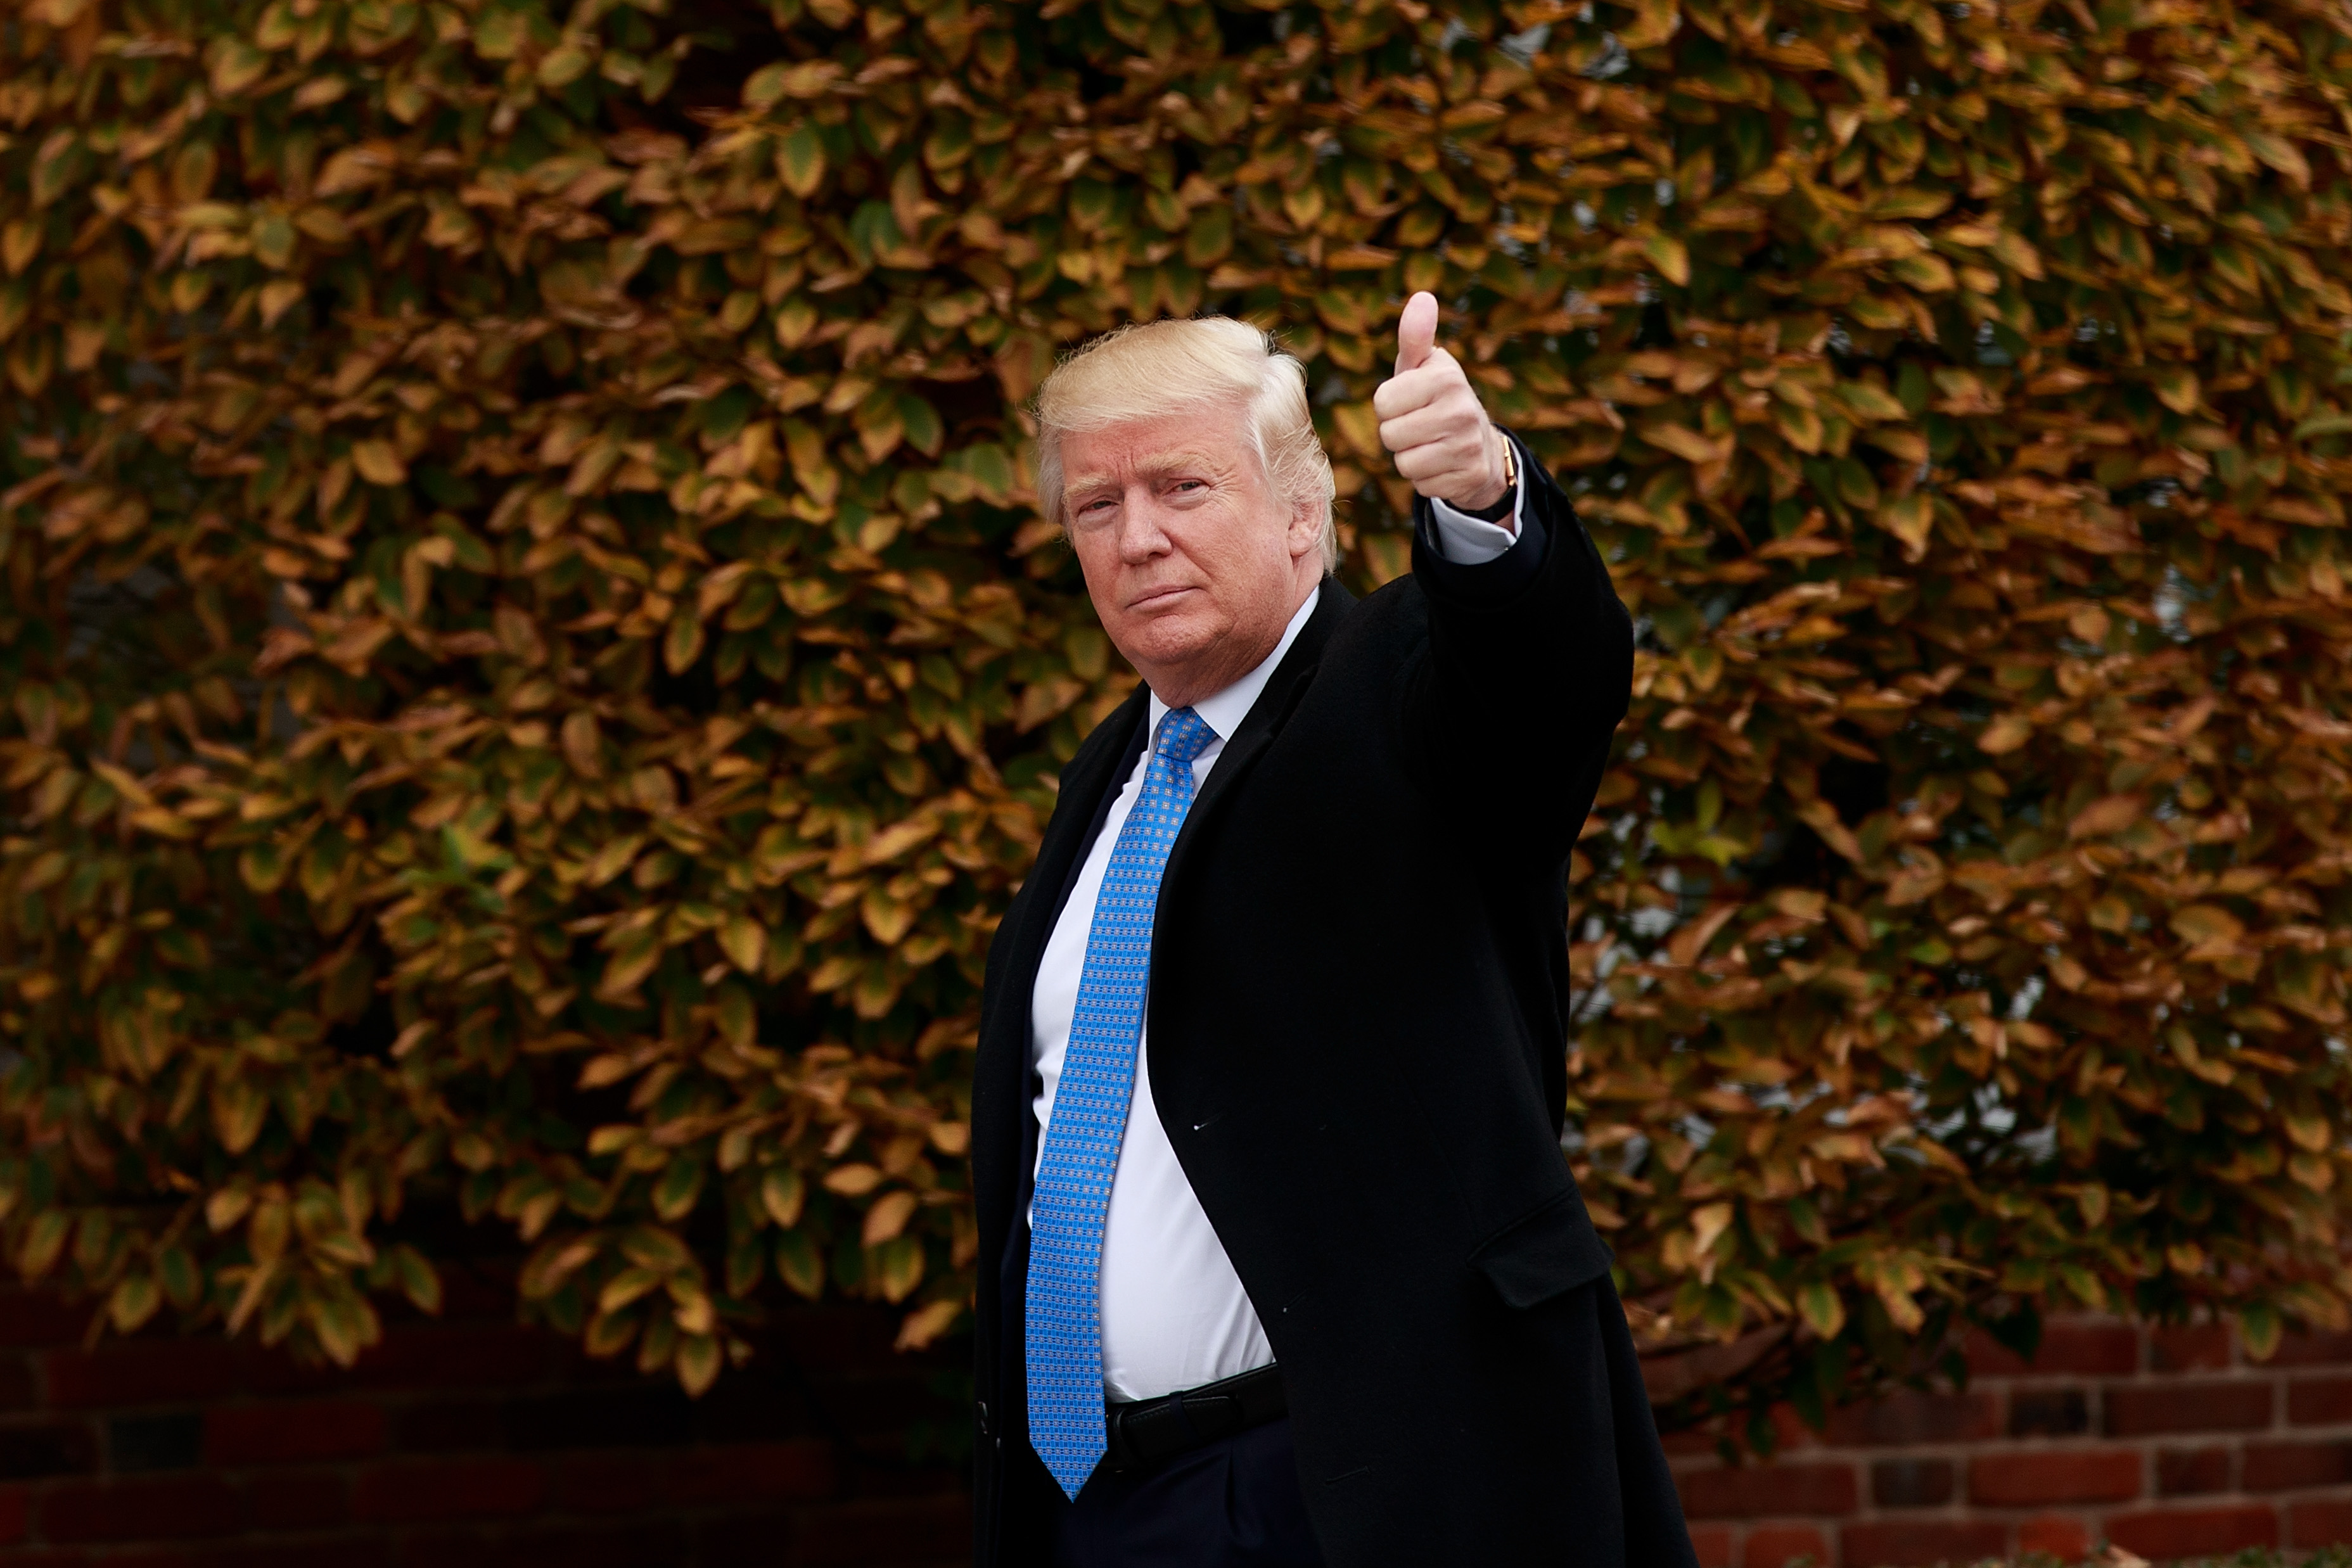 President-elect Donald Trump waves as he arrives at Trump International Golf Club for a day of meetings in Bedminster Township, NY, on Nov. 20, 2016.